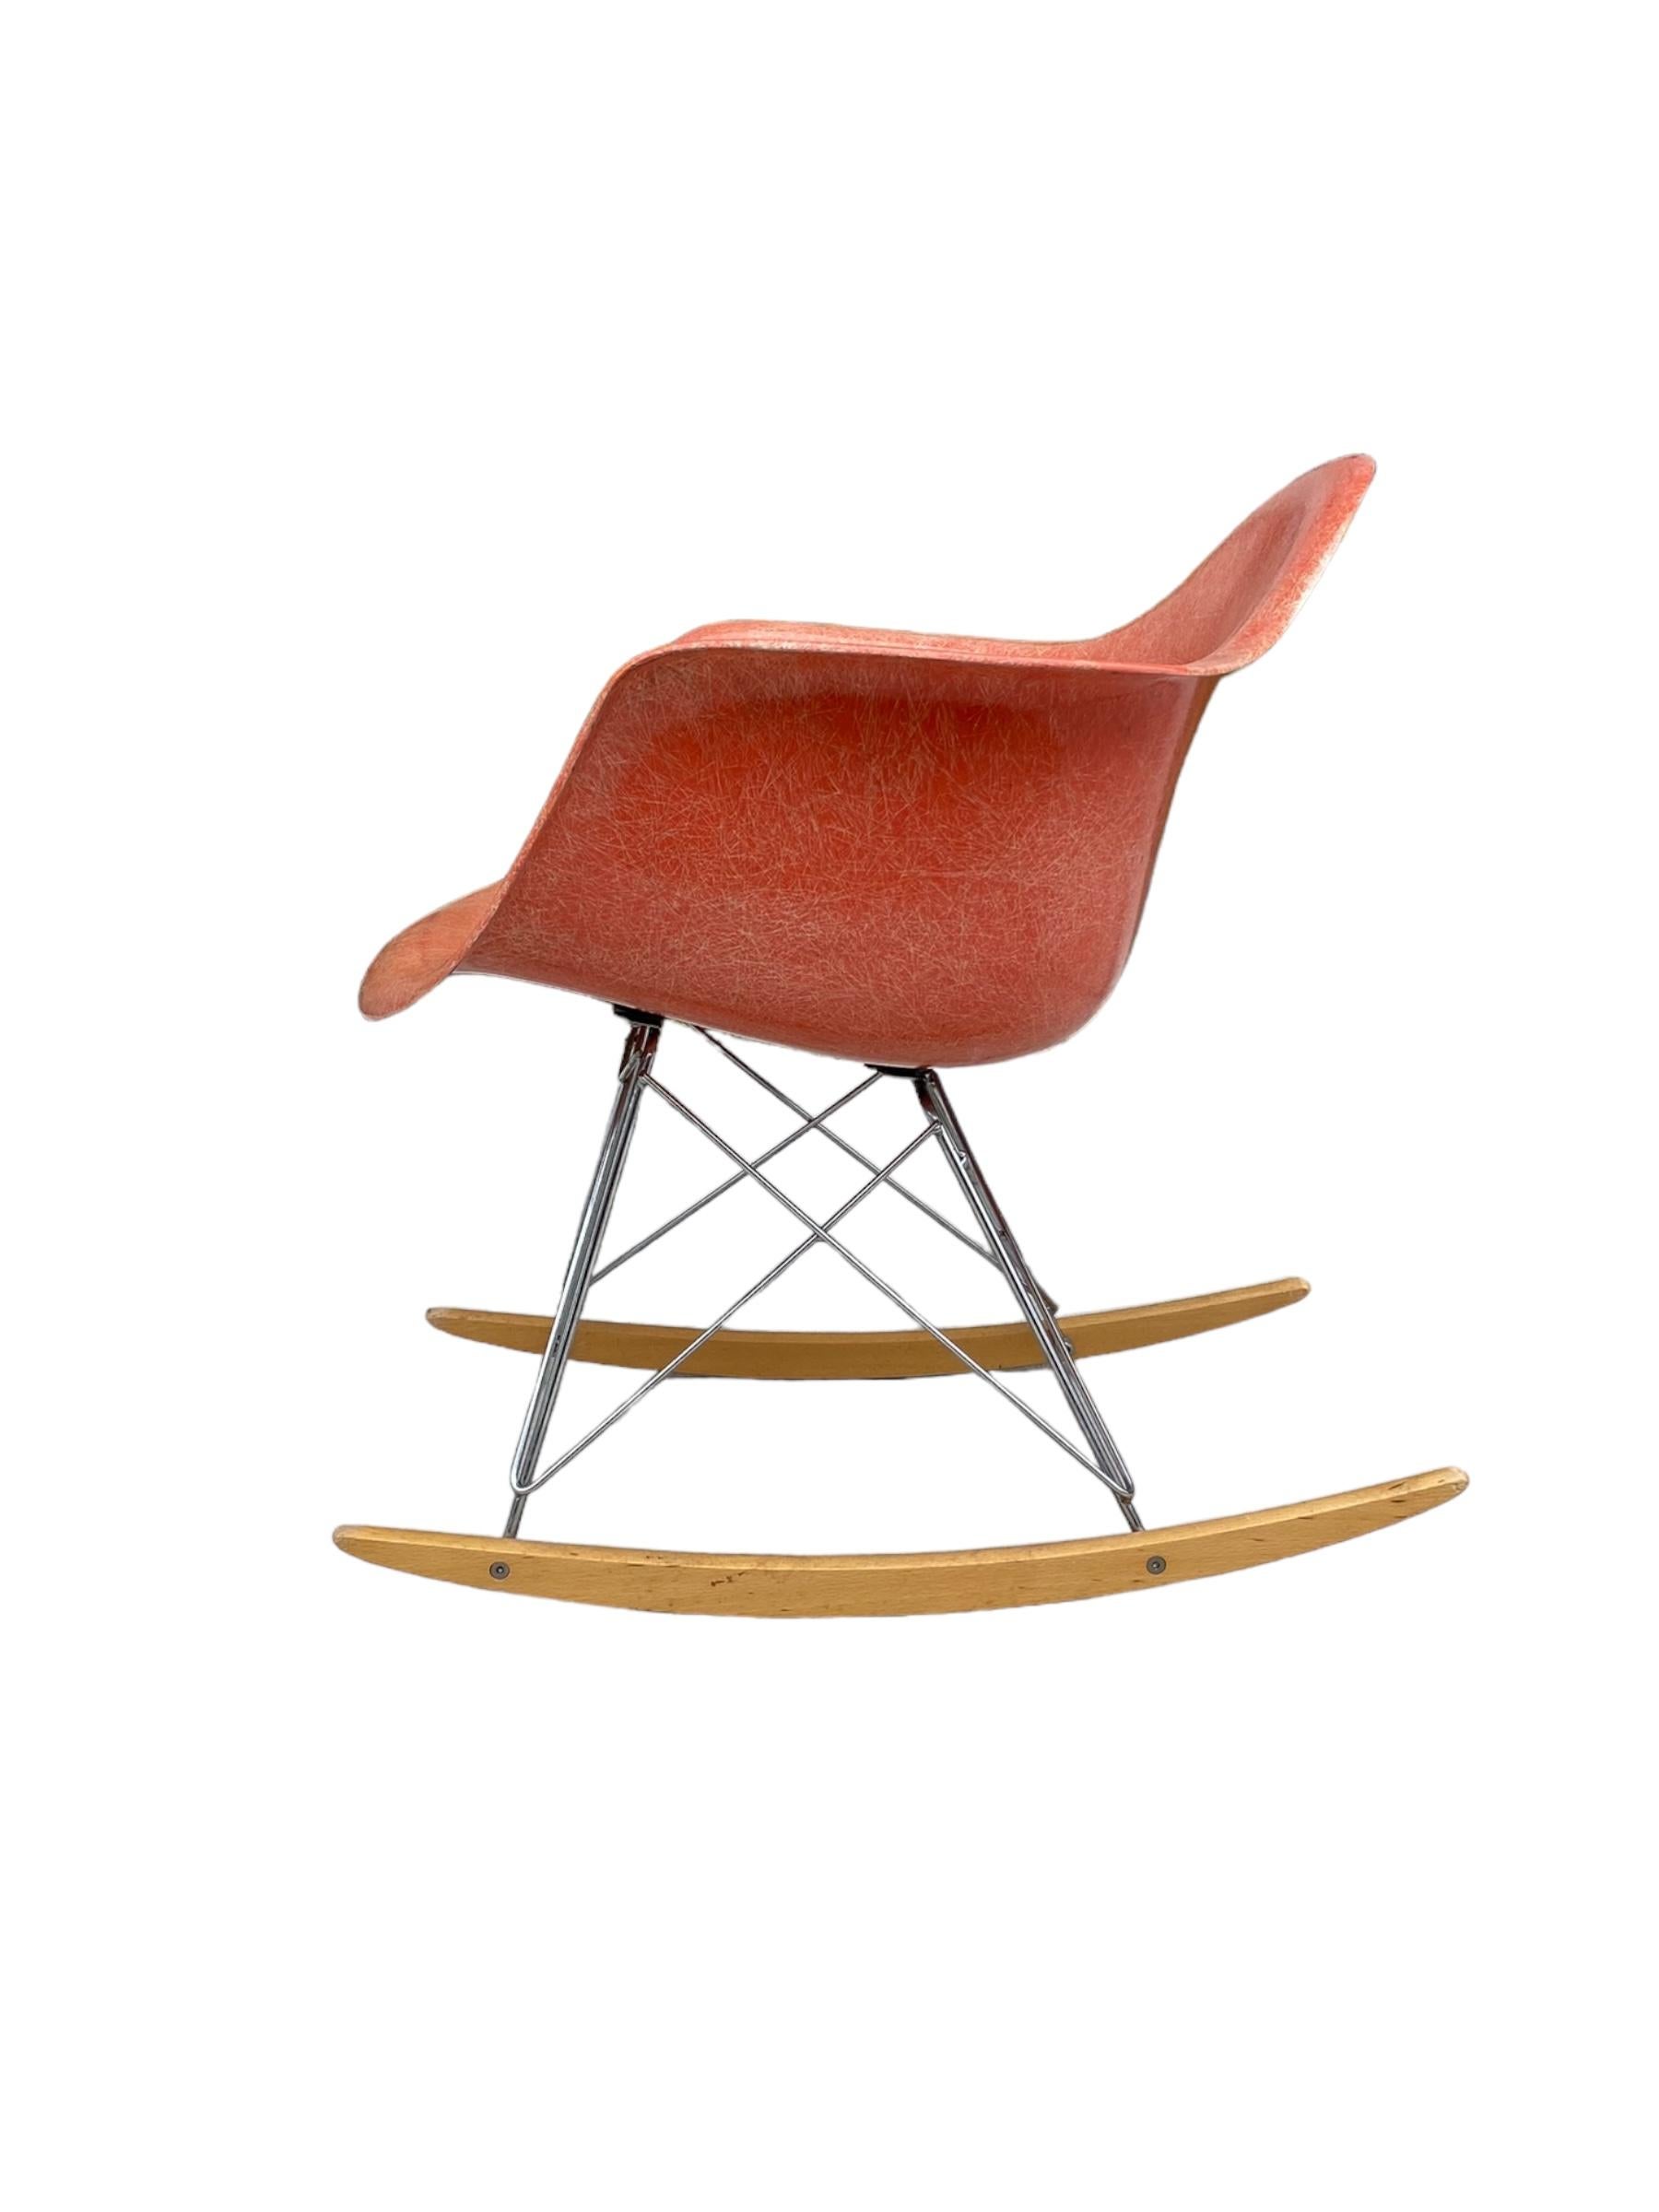 Herman Miller Eames RAR Rocking Chair in Red Orange In Fair Condition For Sale In Brooklyn, NY